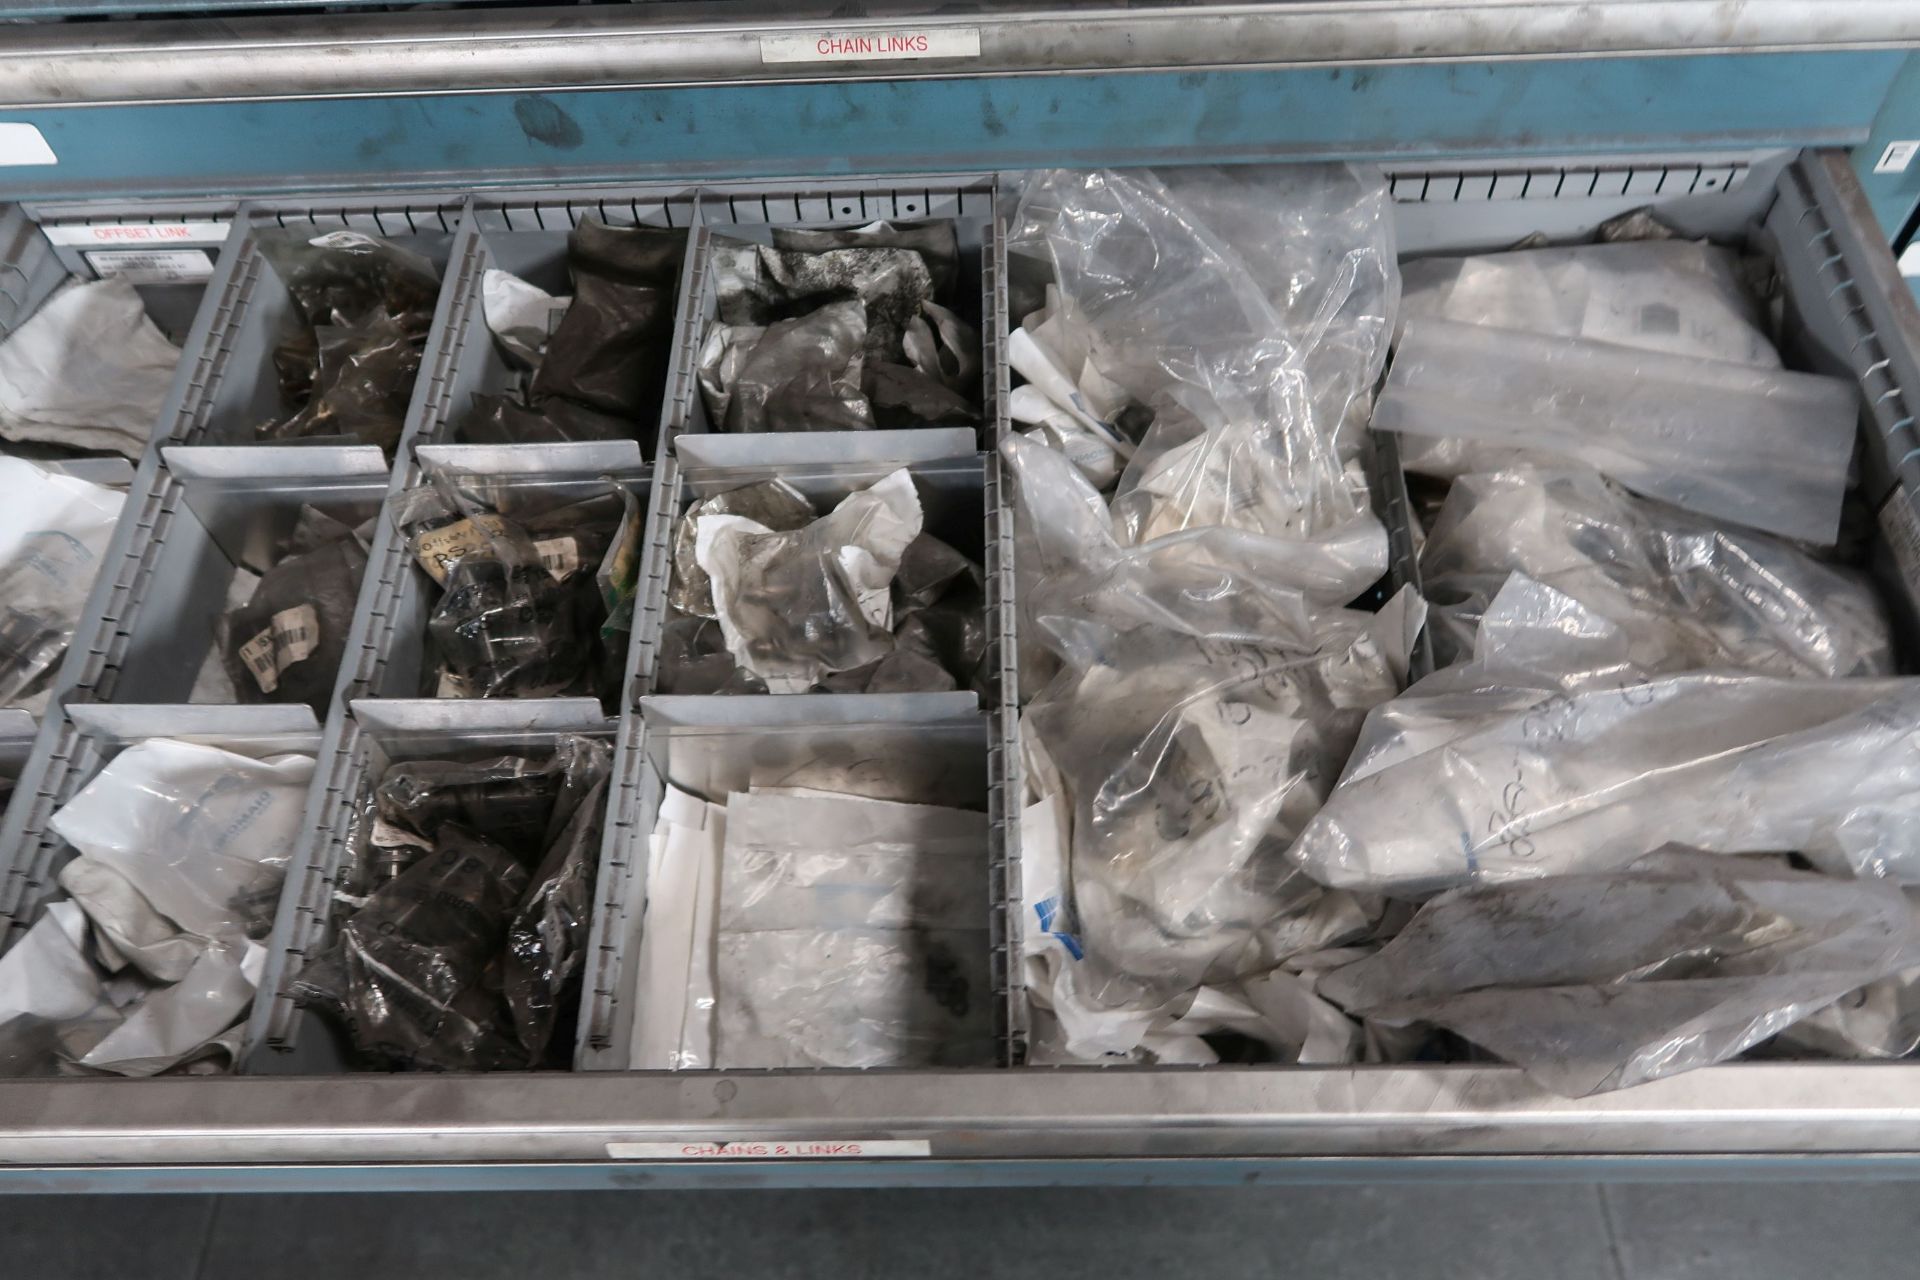 TOOLING CABINETS WITH CONTENTS - MOSTLY MACHINE PARTS **LOADING PRICE DUE TO ERRA - $2,000.00** - Image 23 of 59